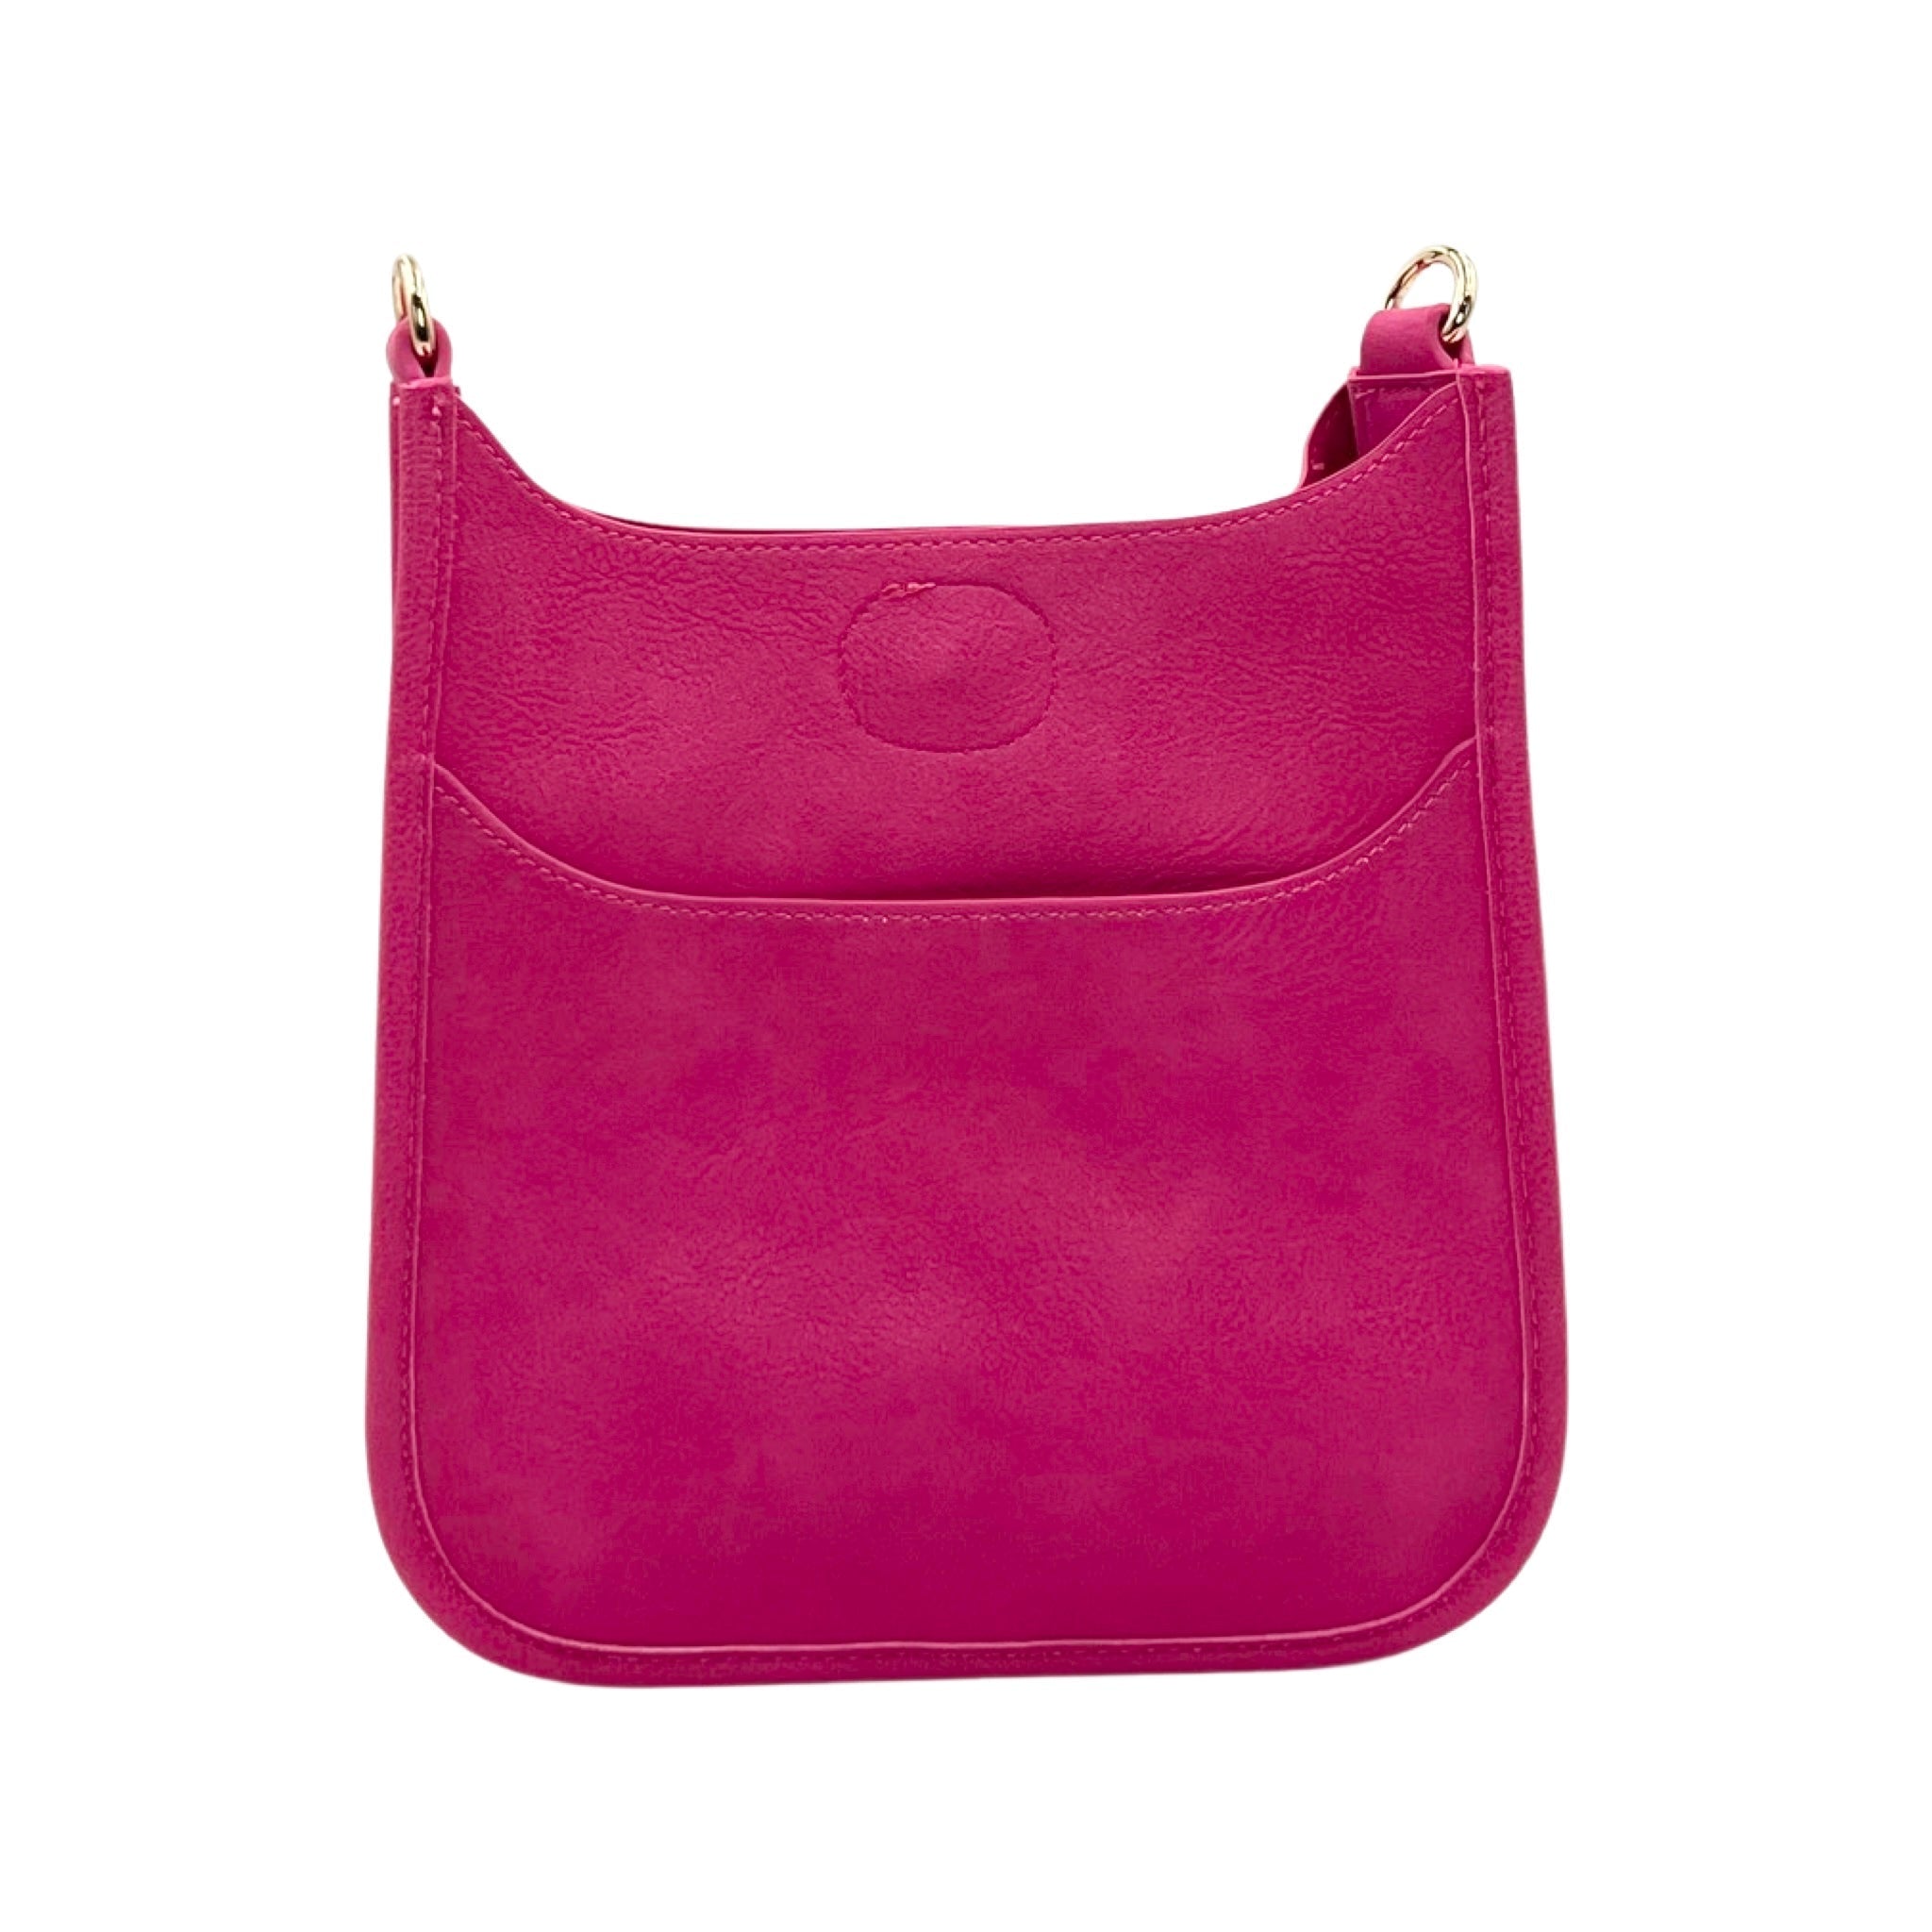 My first bags from Longchamp! Fell in love with this petal pink